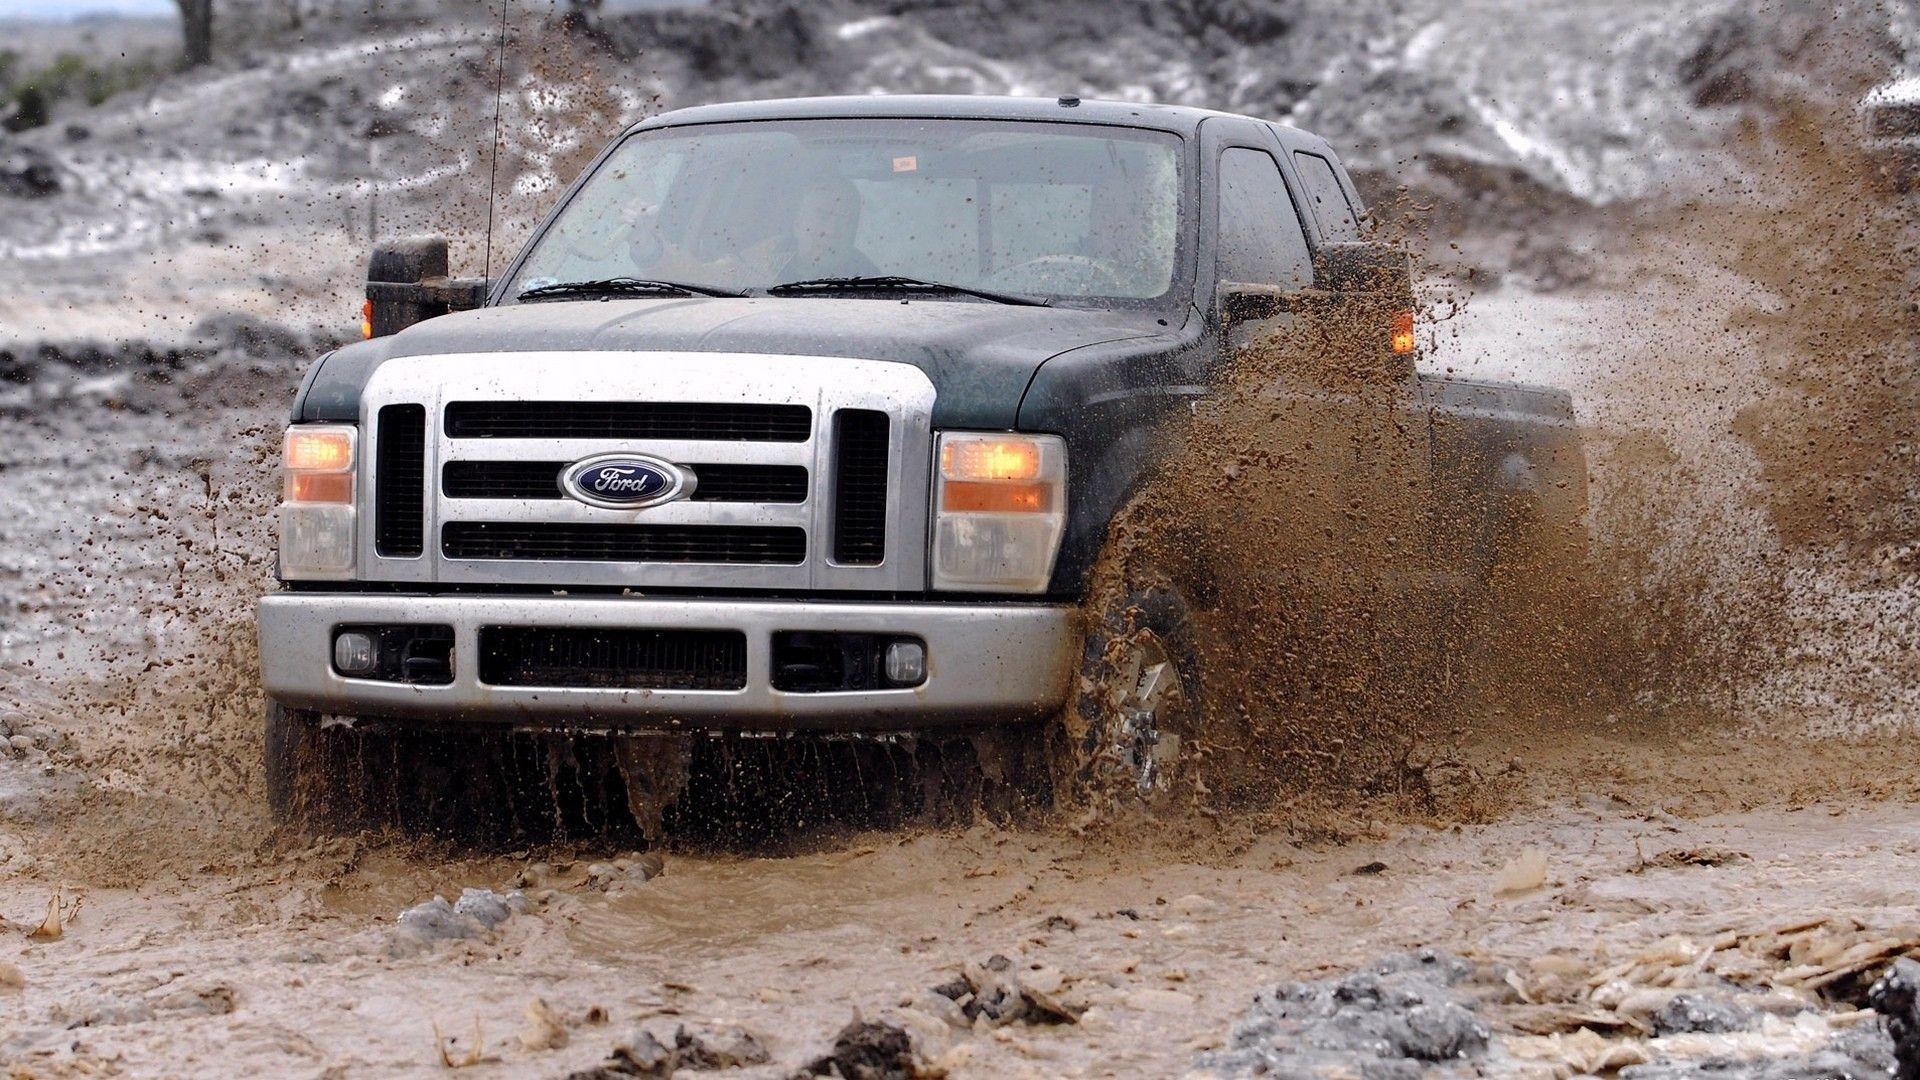 Ford Truck wallpapers.